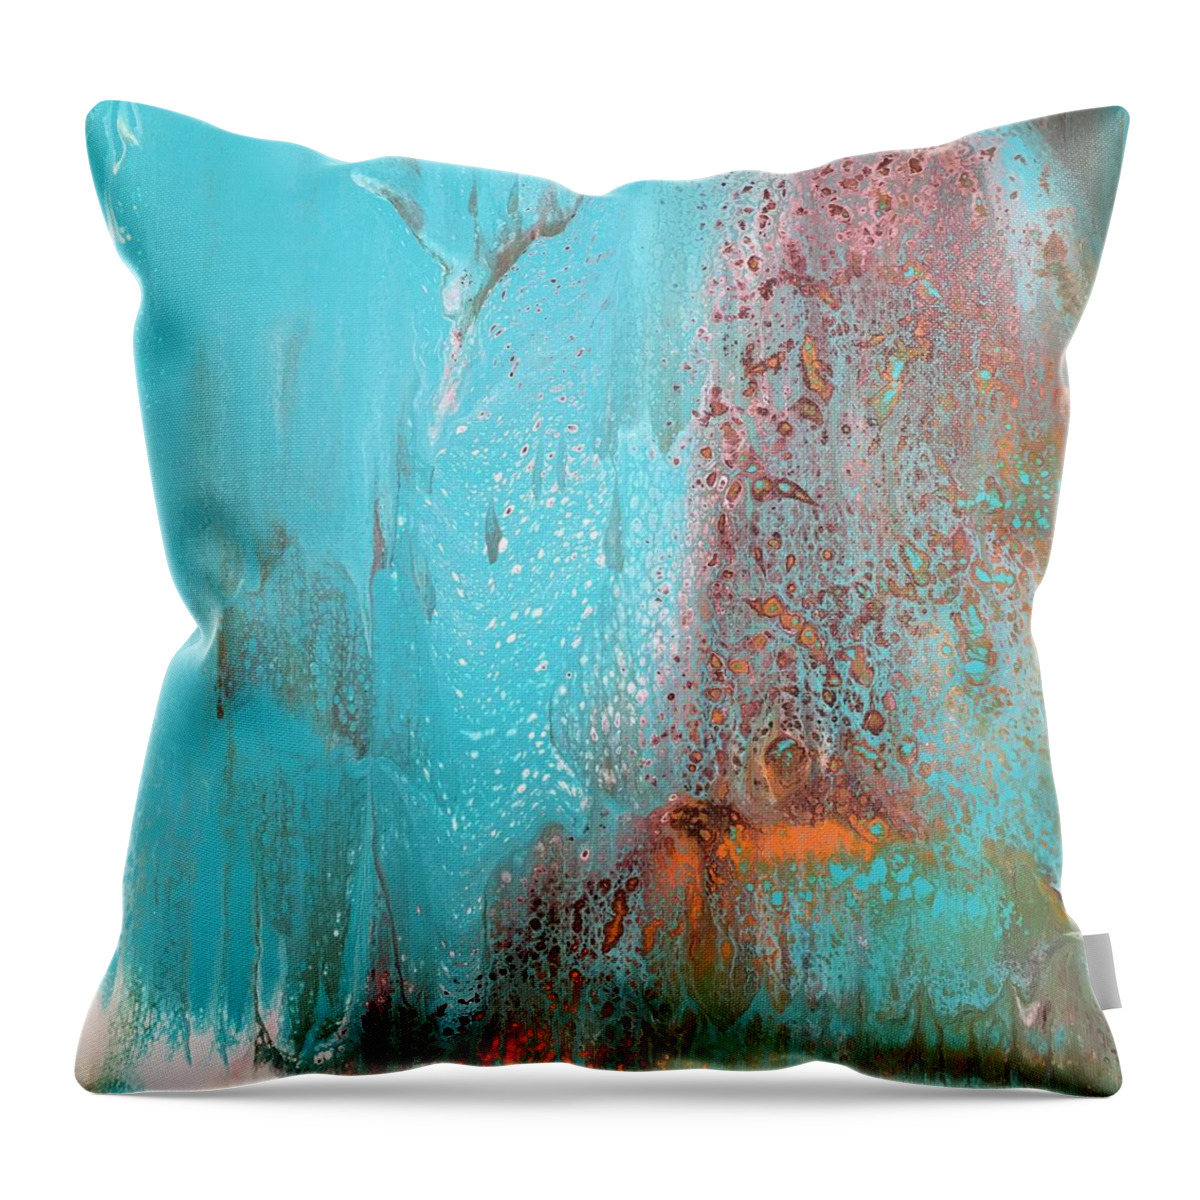 Abstract Throw Pillow featuring the painting Fortuity by Soraya Silvestri